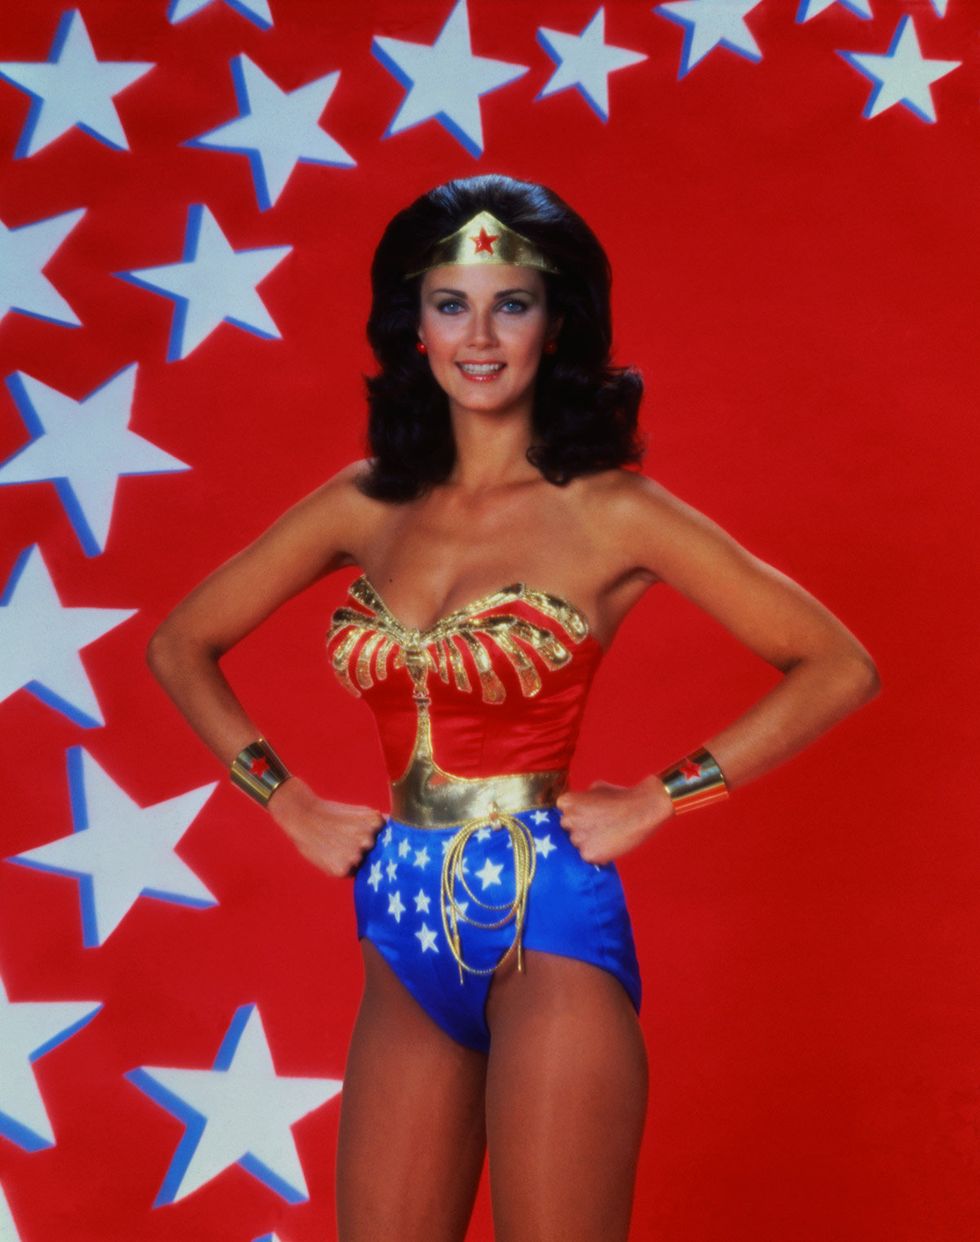 Mouth, Smile, Wonder Woman, Thigh, Abdomen, Costume, Electric blue, Waist, Costume accessory, Fictional character, 